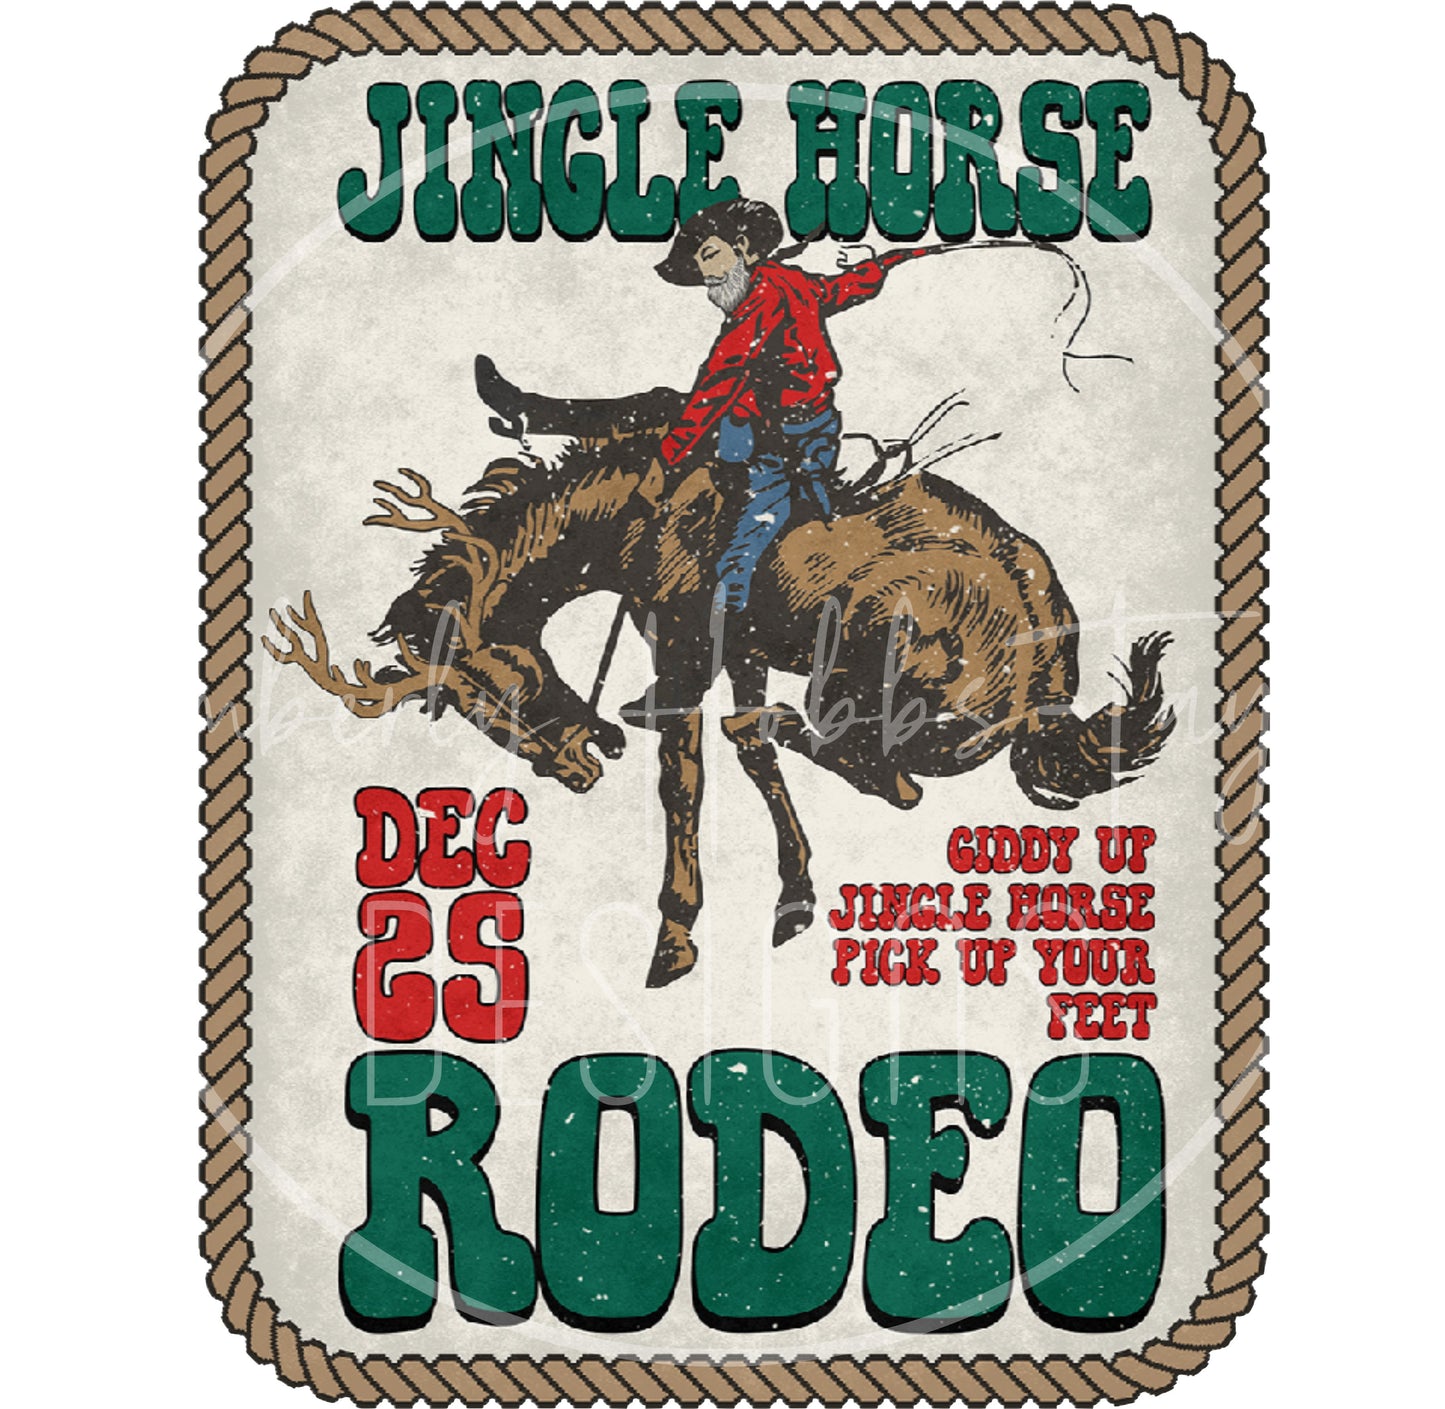 Jingle Horse Rodeo decal